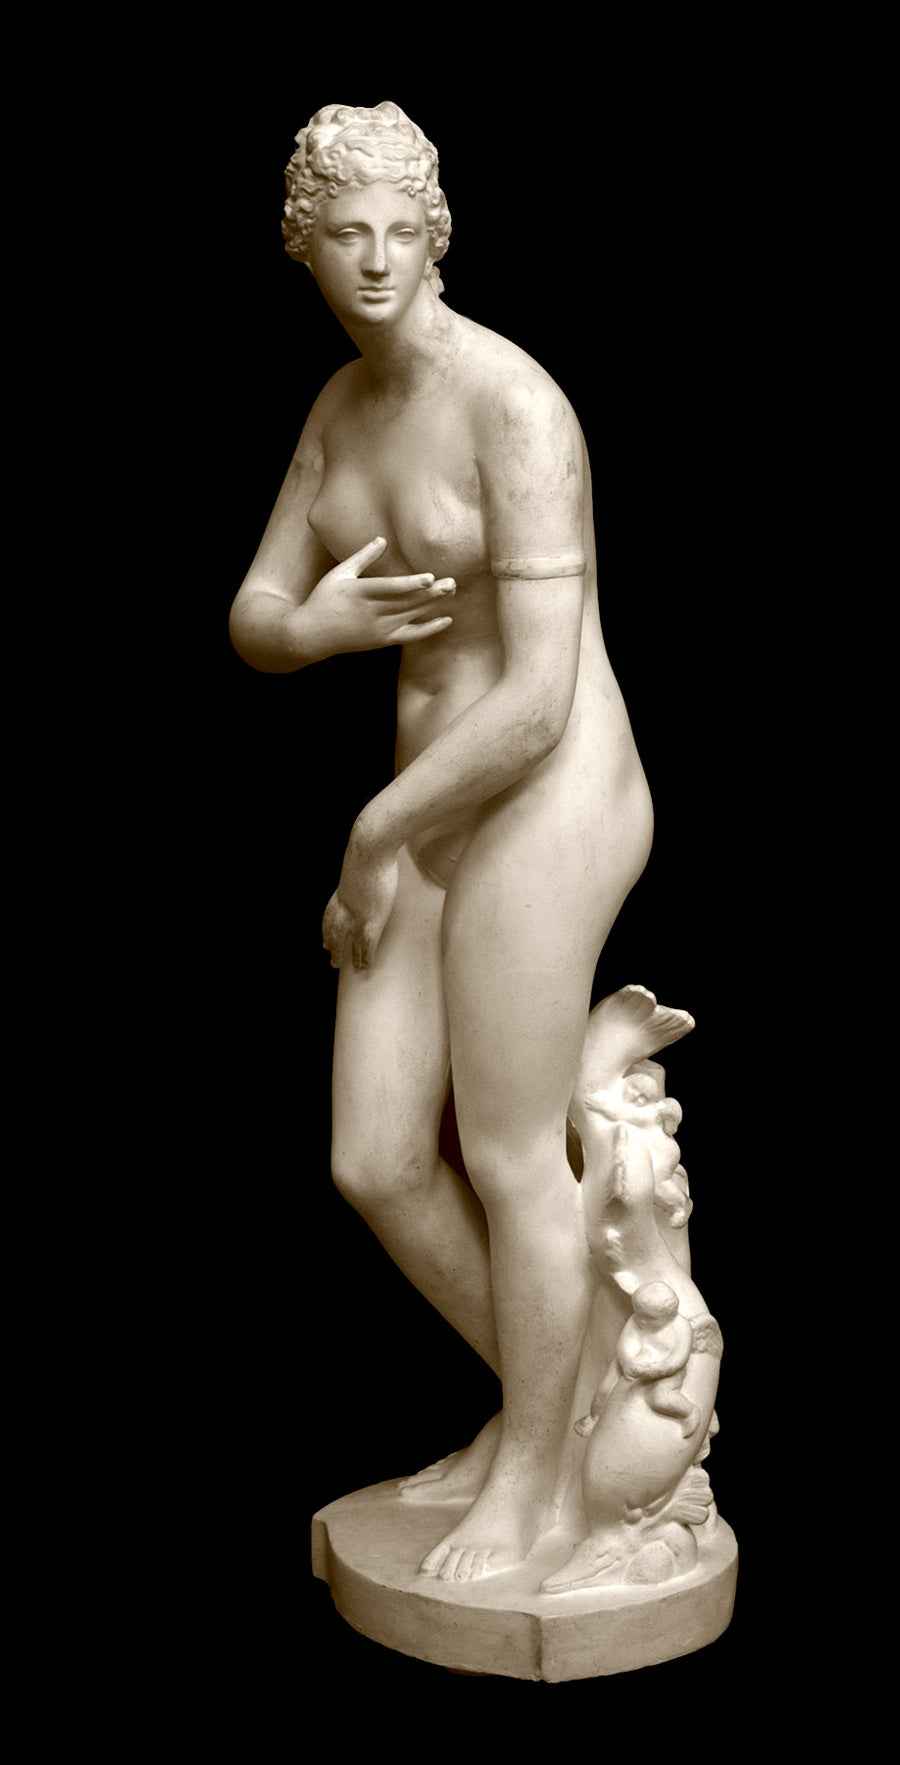 photo of plaster cast sculpture of Venus standing nude with two putti riding a dolphin at her feet